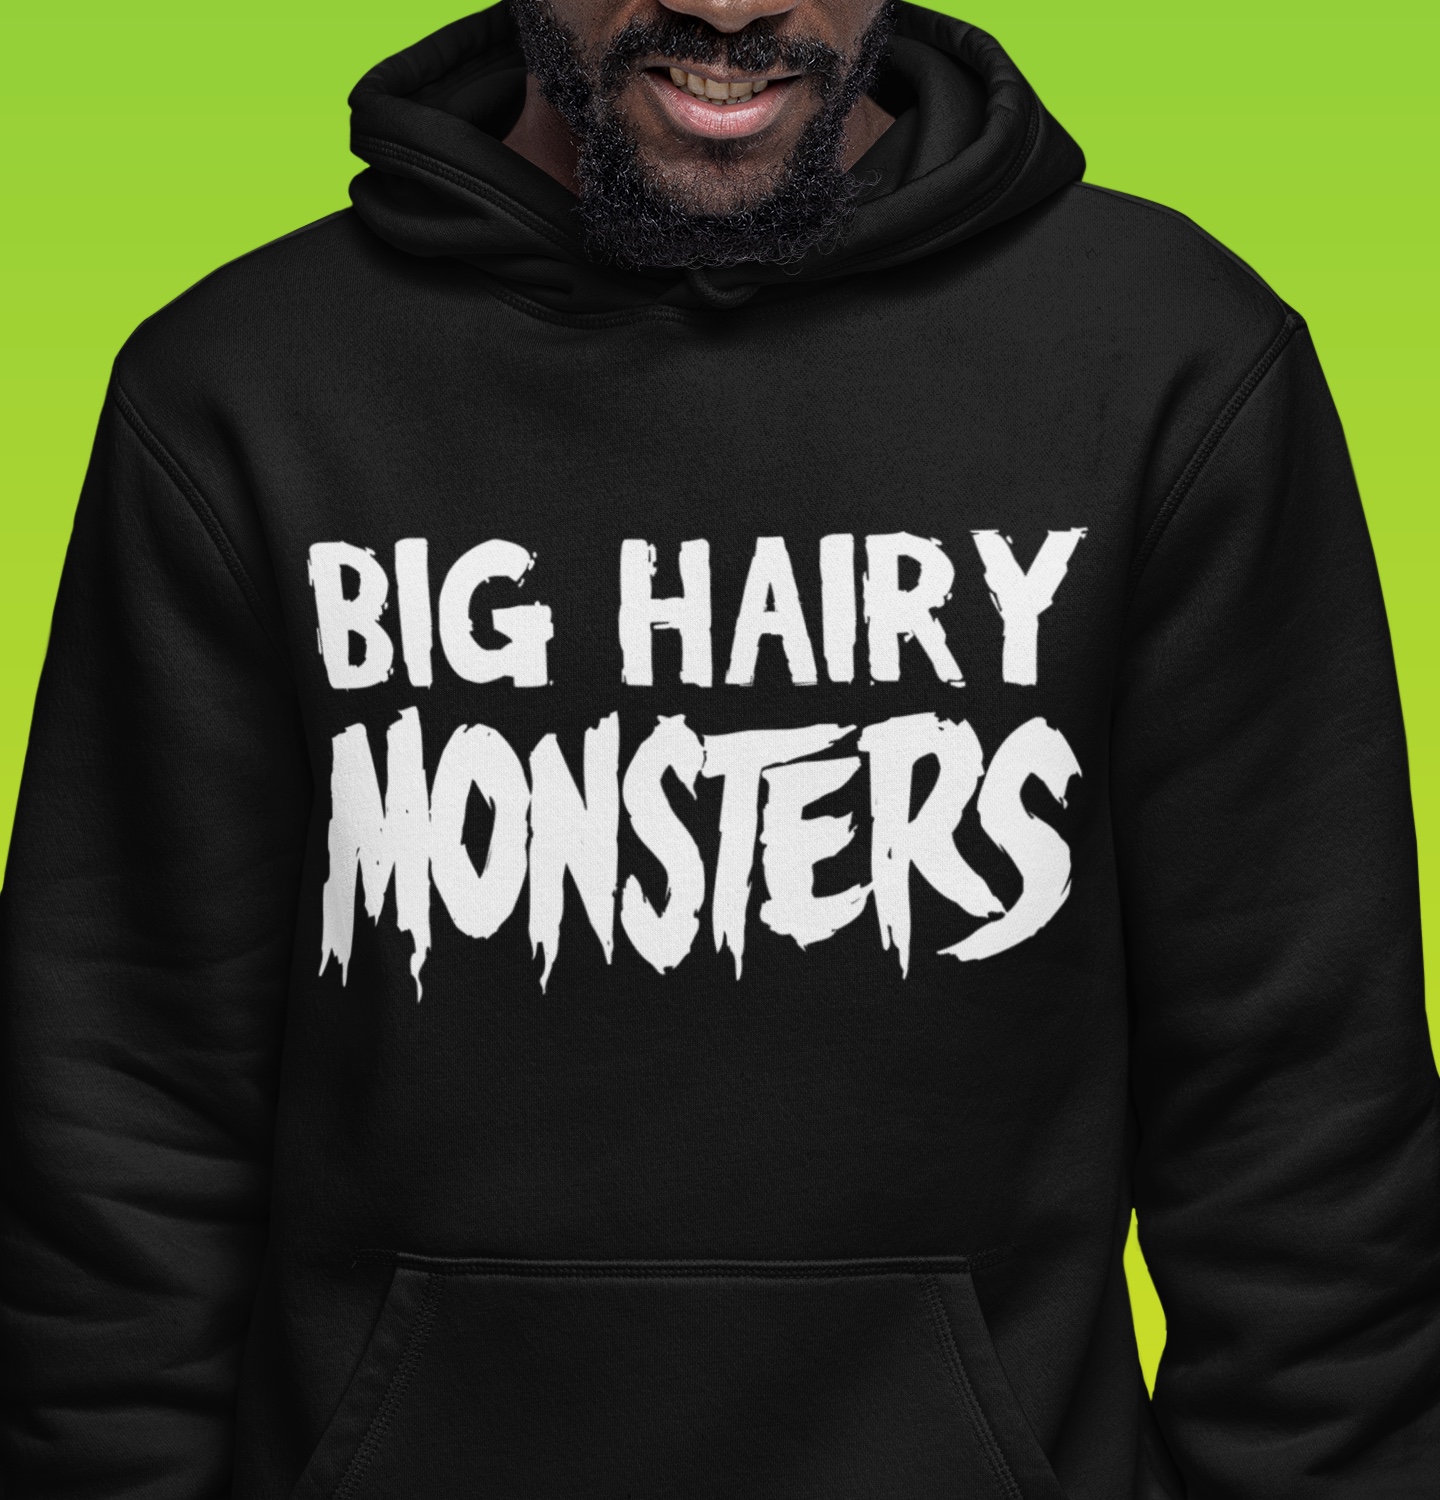 Featured image for “Big Hairy Monsters - Unisex Hoodie”